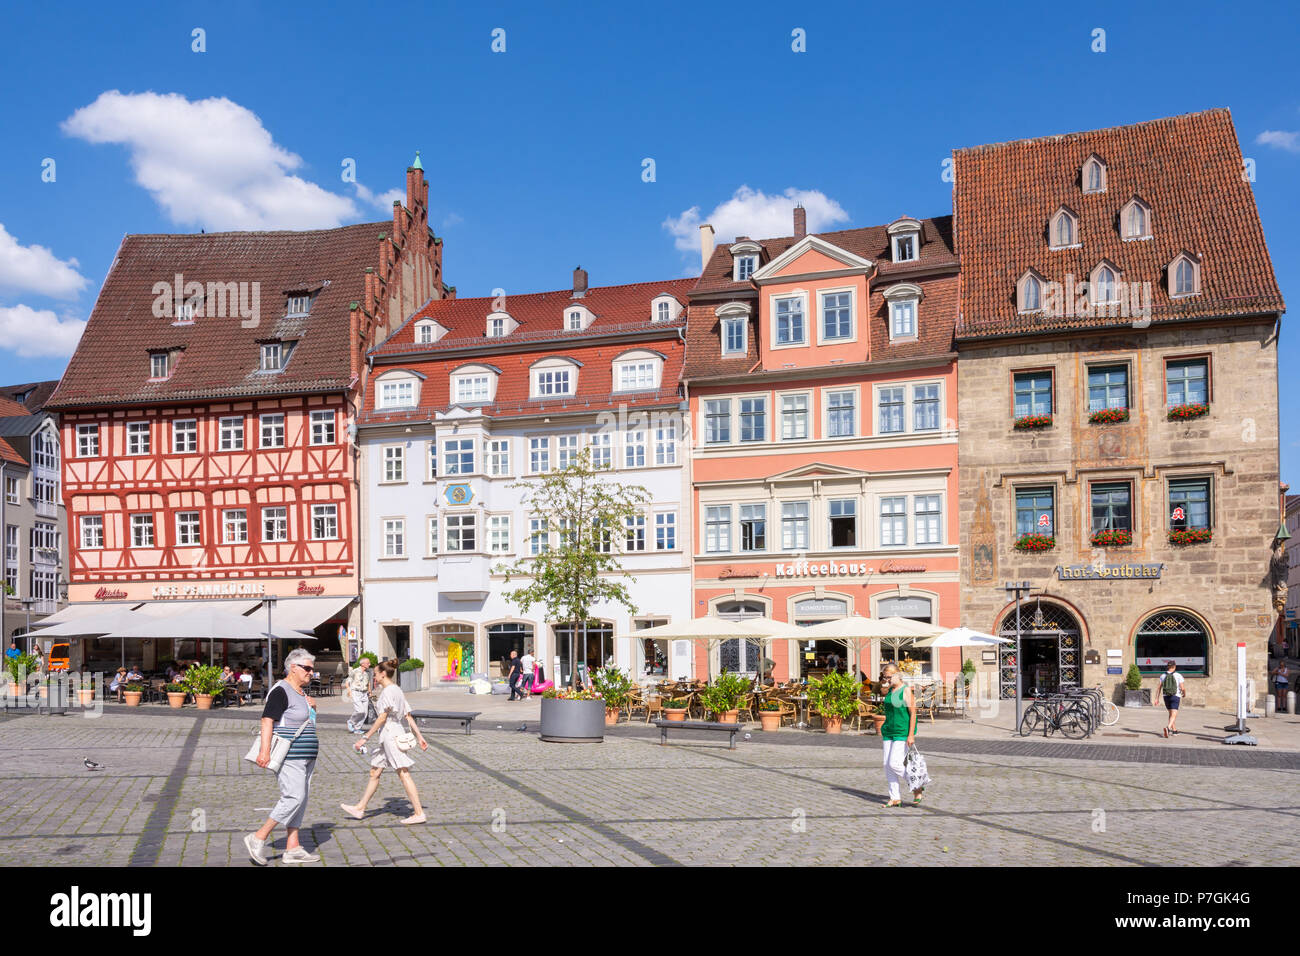 COBURG, GERMANY - JUNE 20: People the historic marketplace of Coburg, Germany on June 20, 2018. Stock Photo